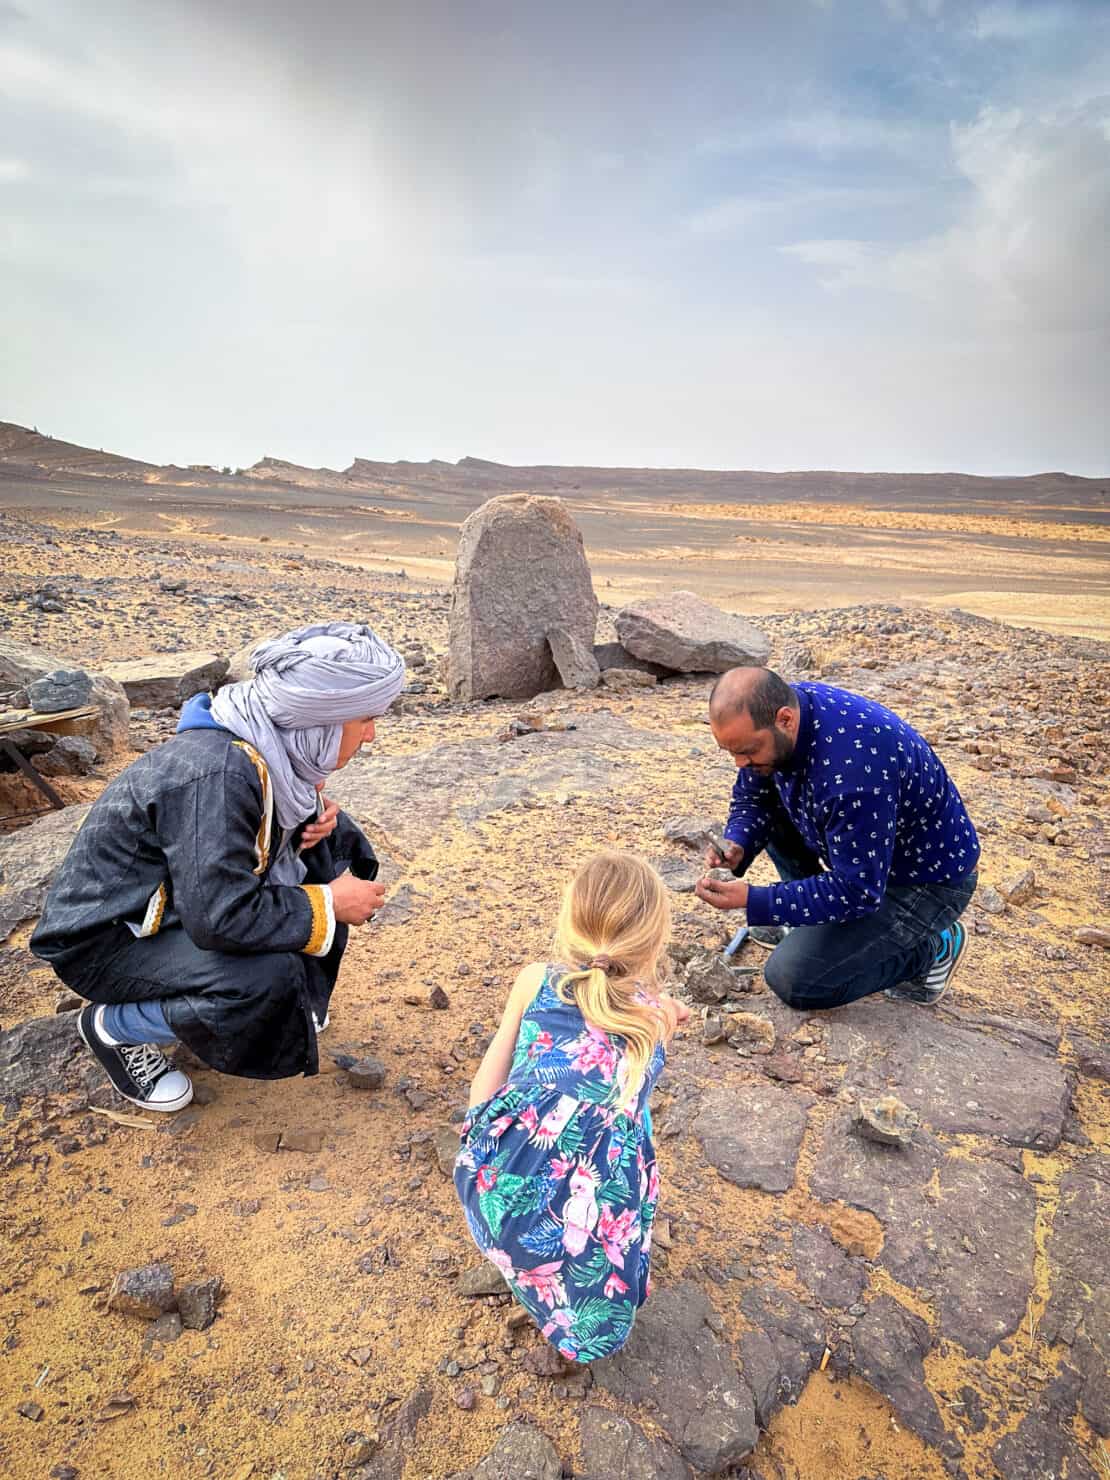 Berber men and blonde child looking for fossils in the desert near Merzouga in Morocco